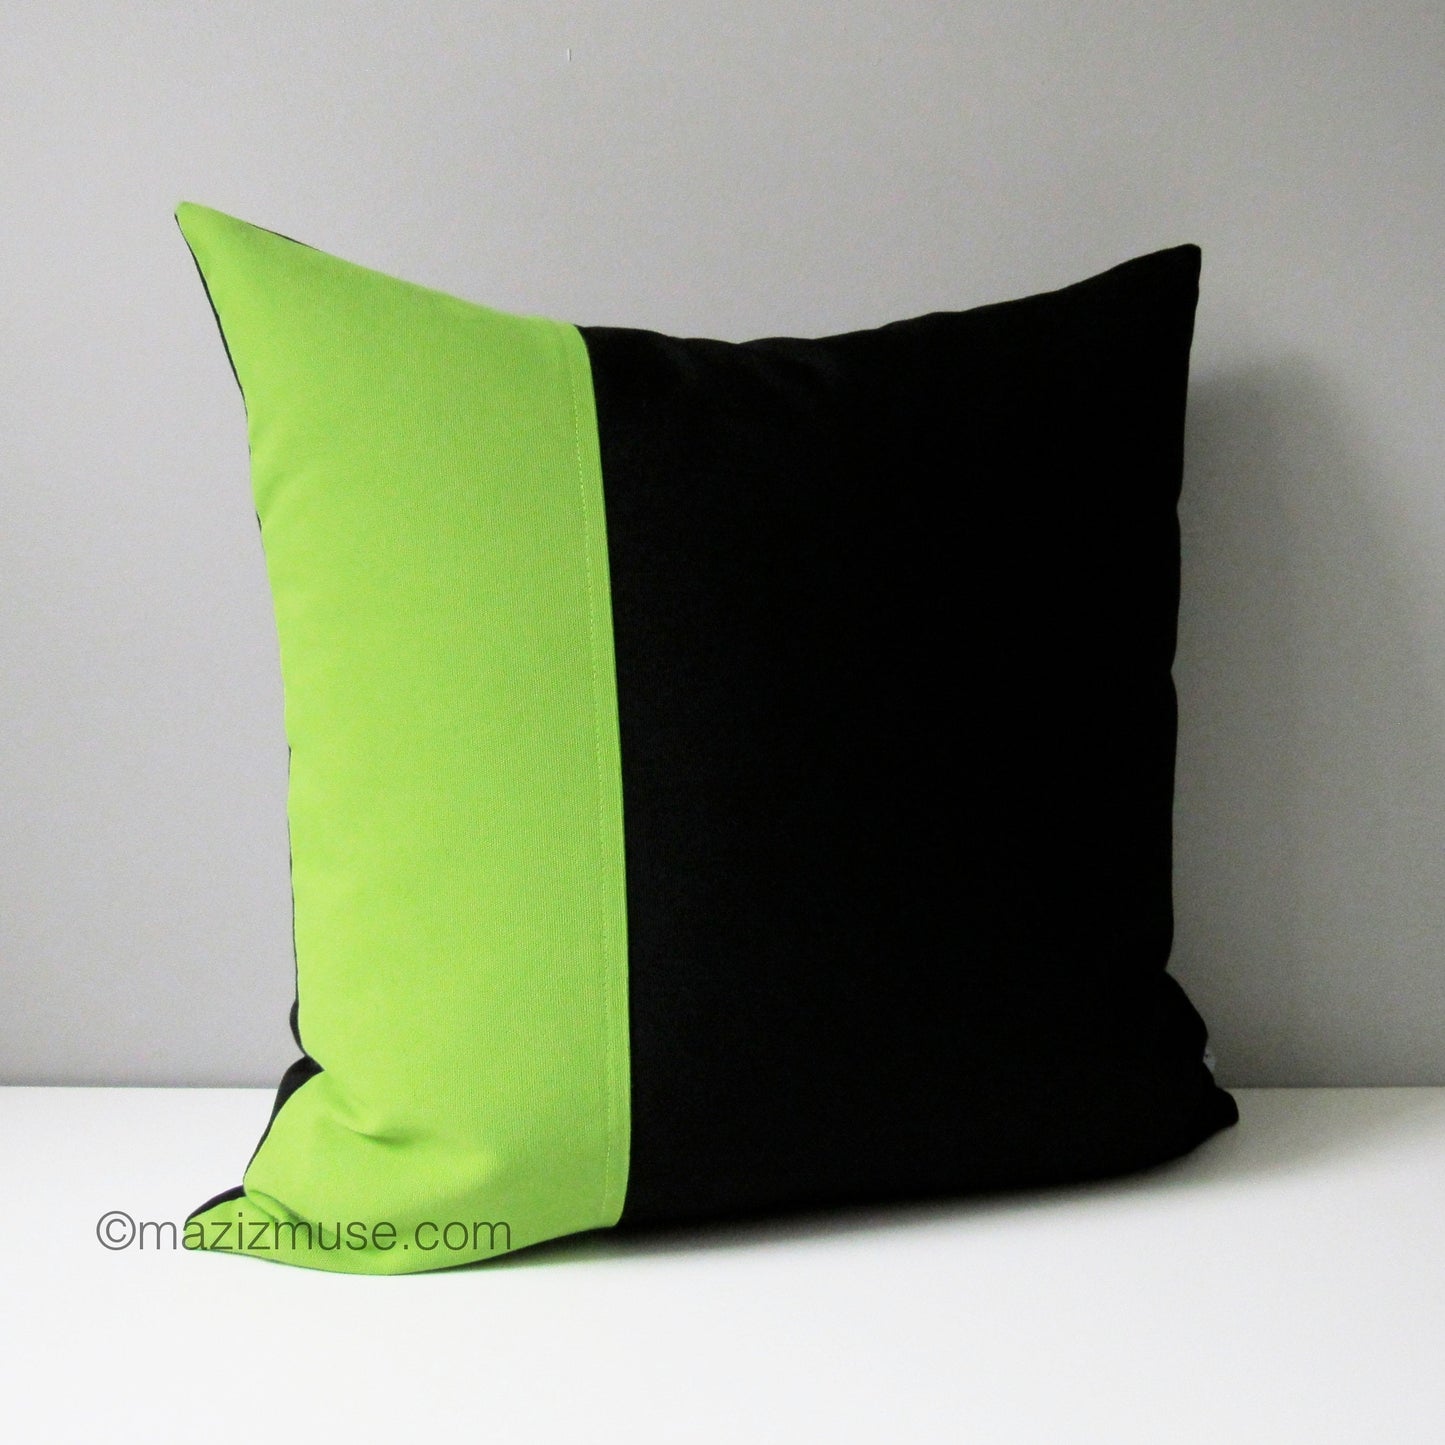 Decorative Lime Green & Black Outdoor Cushion Cover, Modern Color Block Pillow Cover